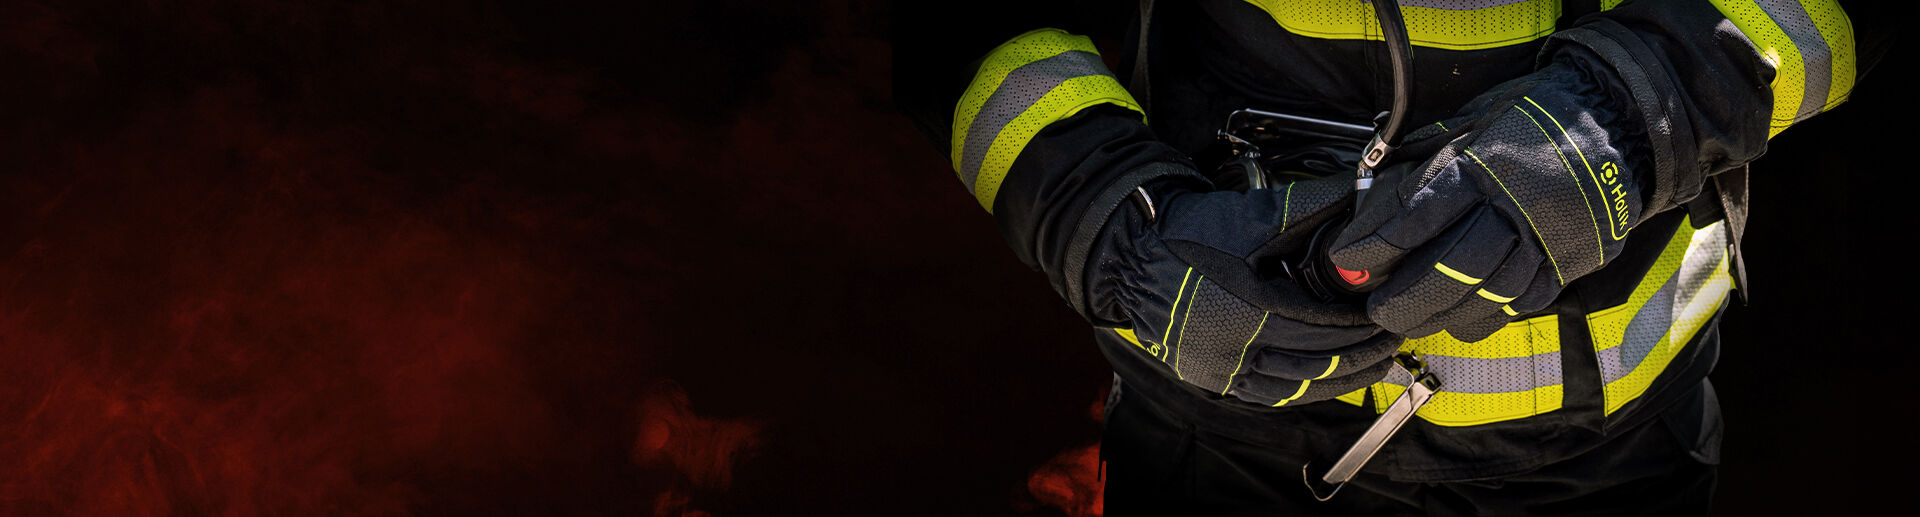 Emergency gloves for firefighters